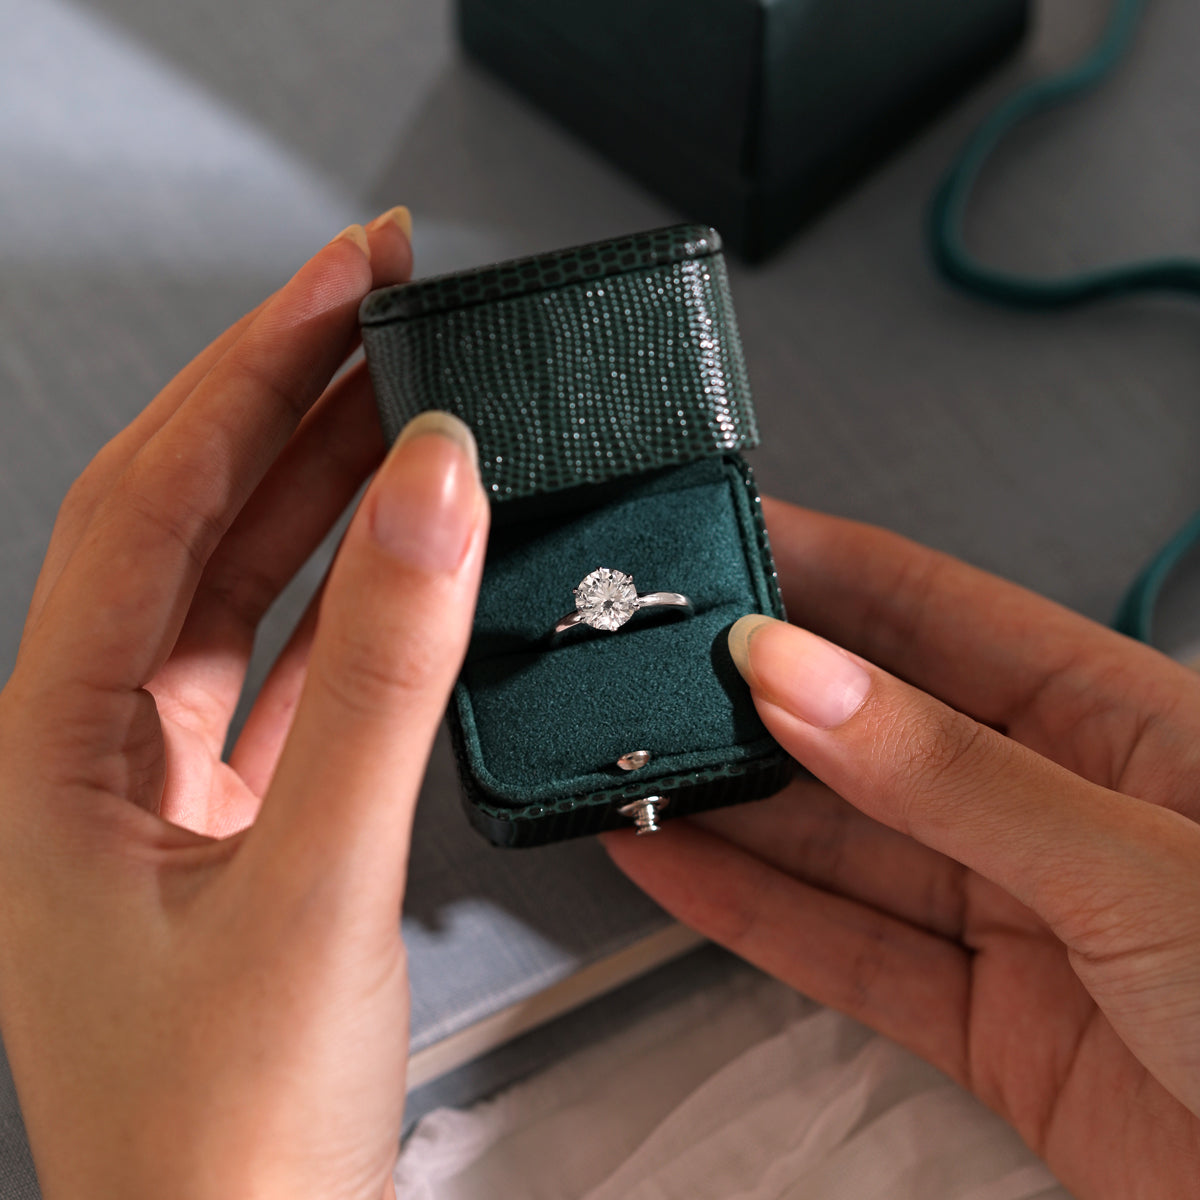 8 Signs You're Ready To Sell Your Engagement Ring | Samuelson's Diamonds